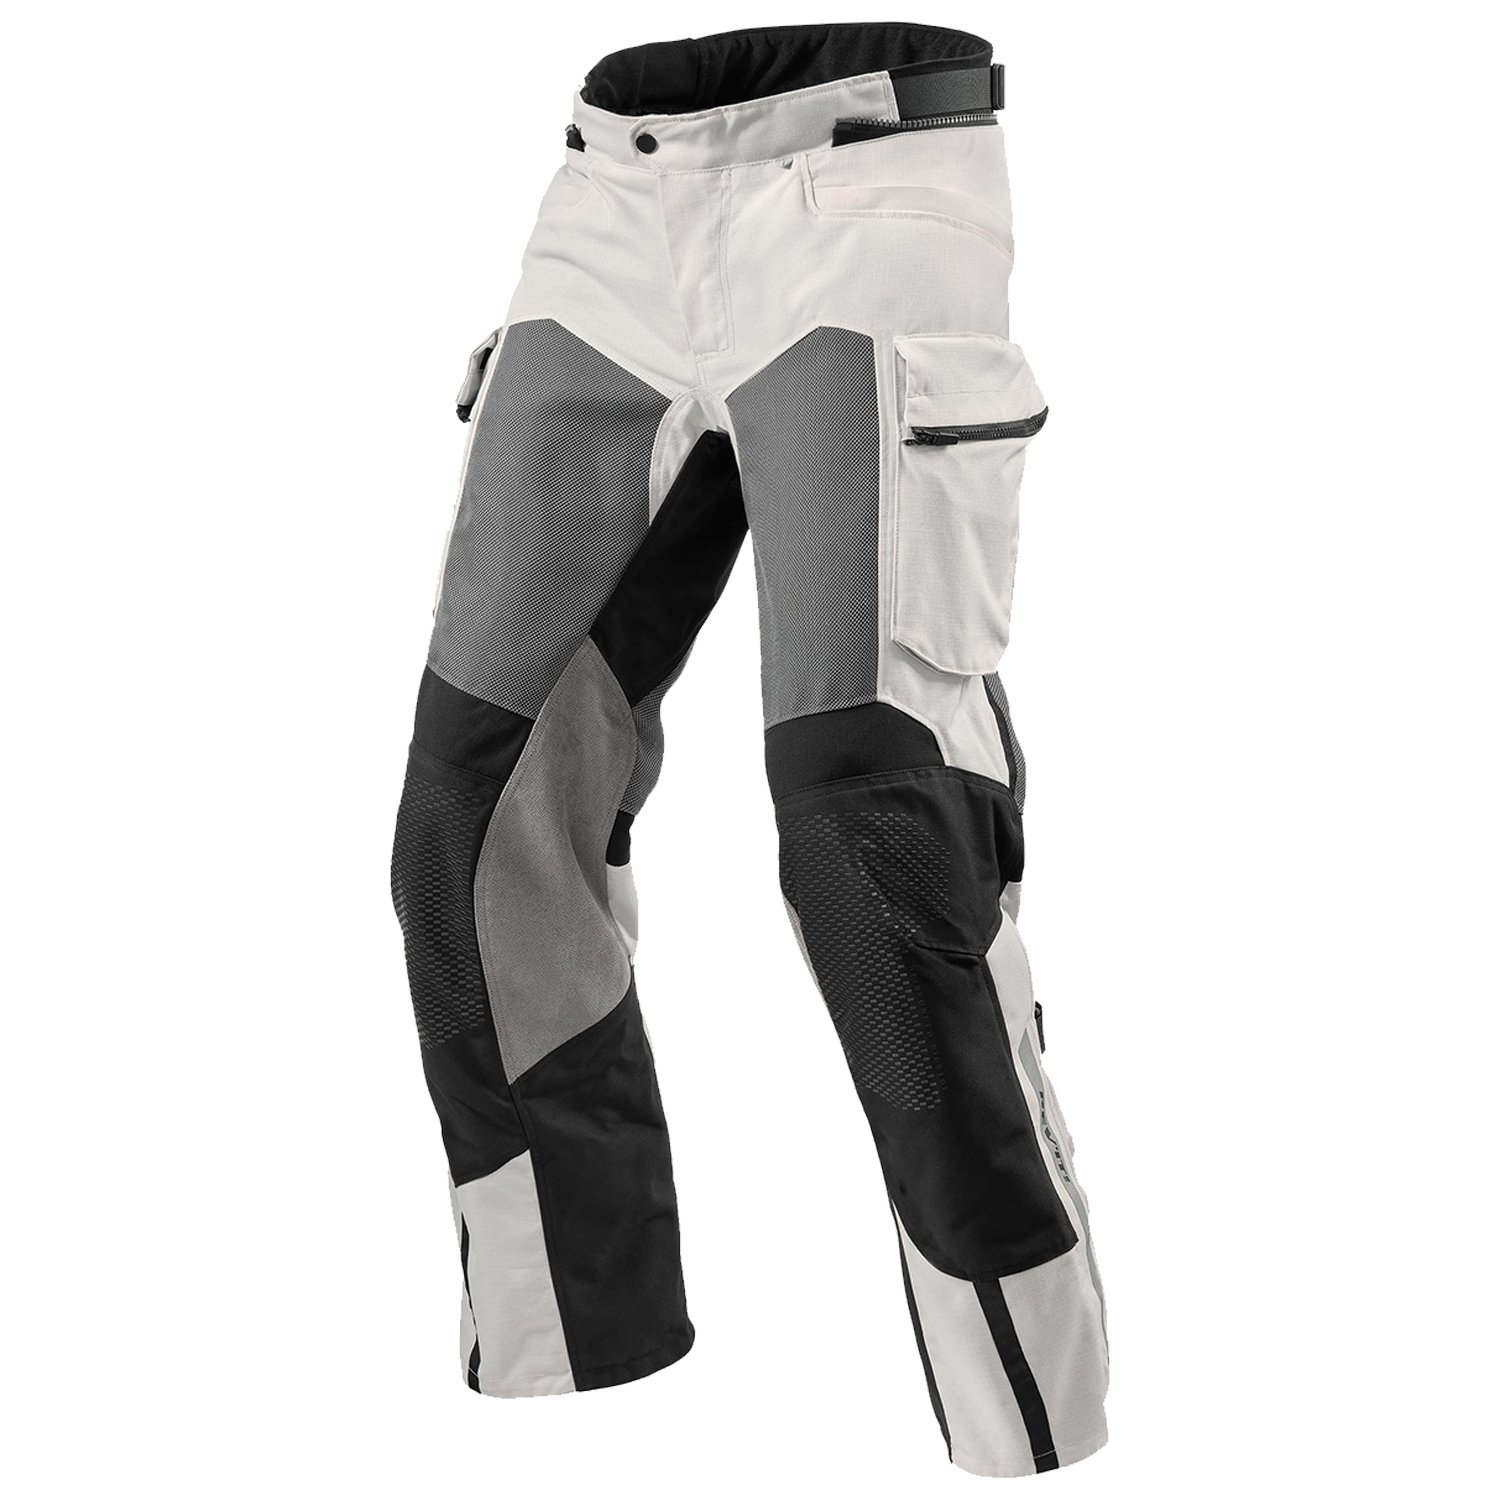 Image of REV'IT! Cayenne 2 Silver Short Motorcycle Pants Size XL ID 8700001335539